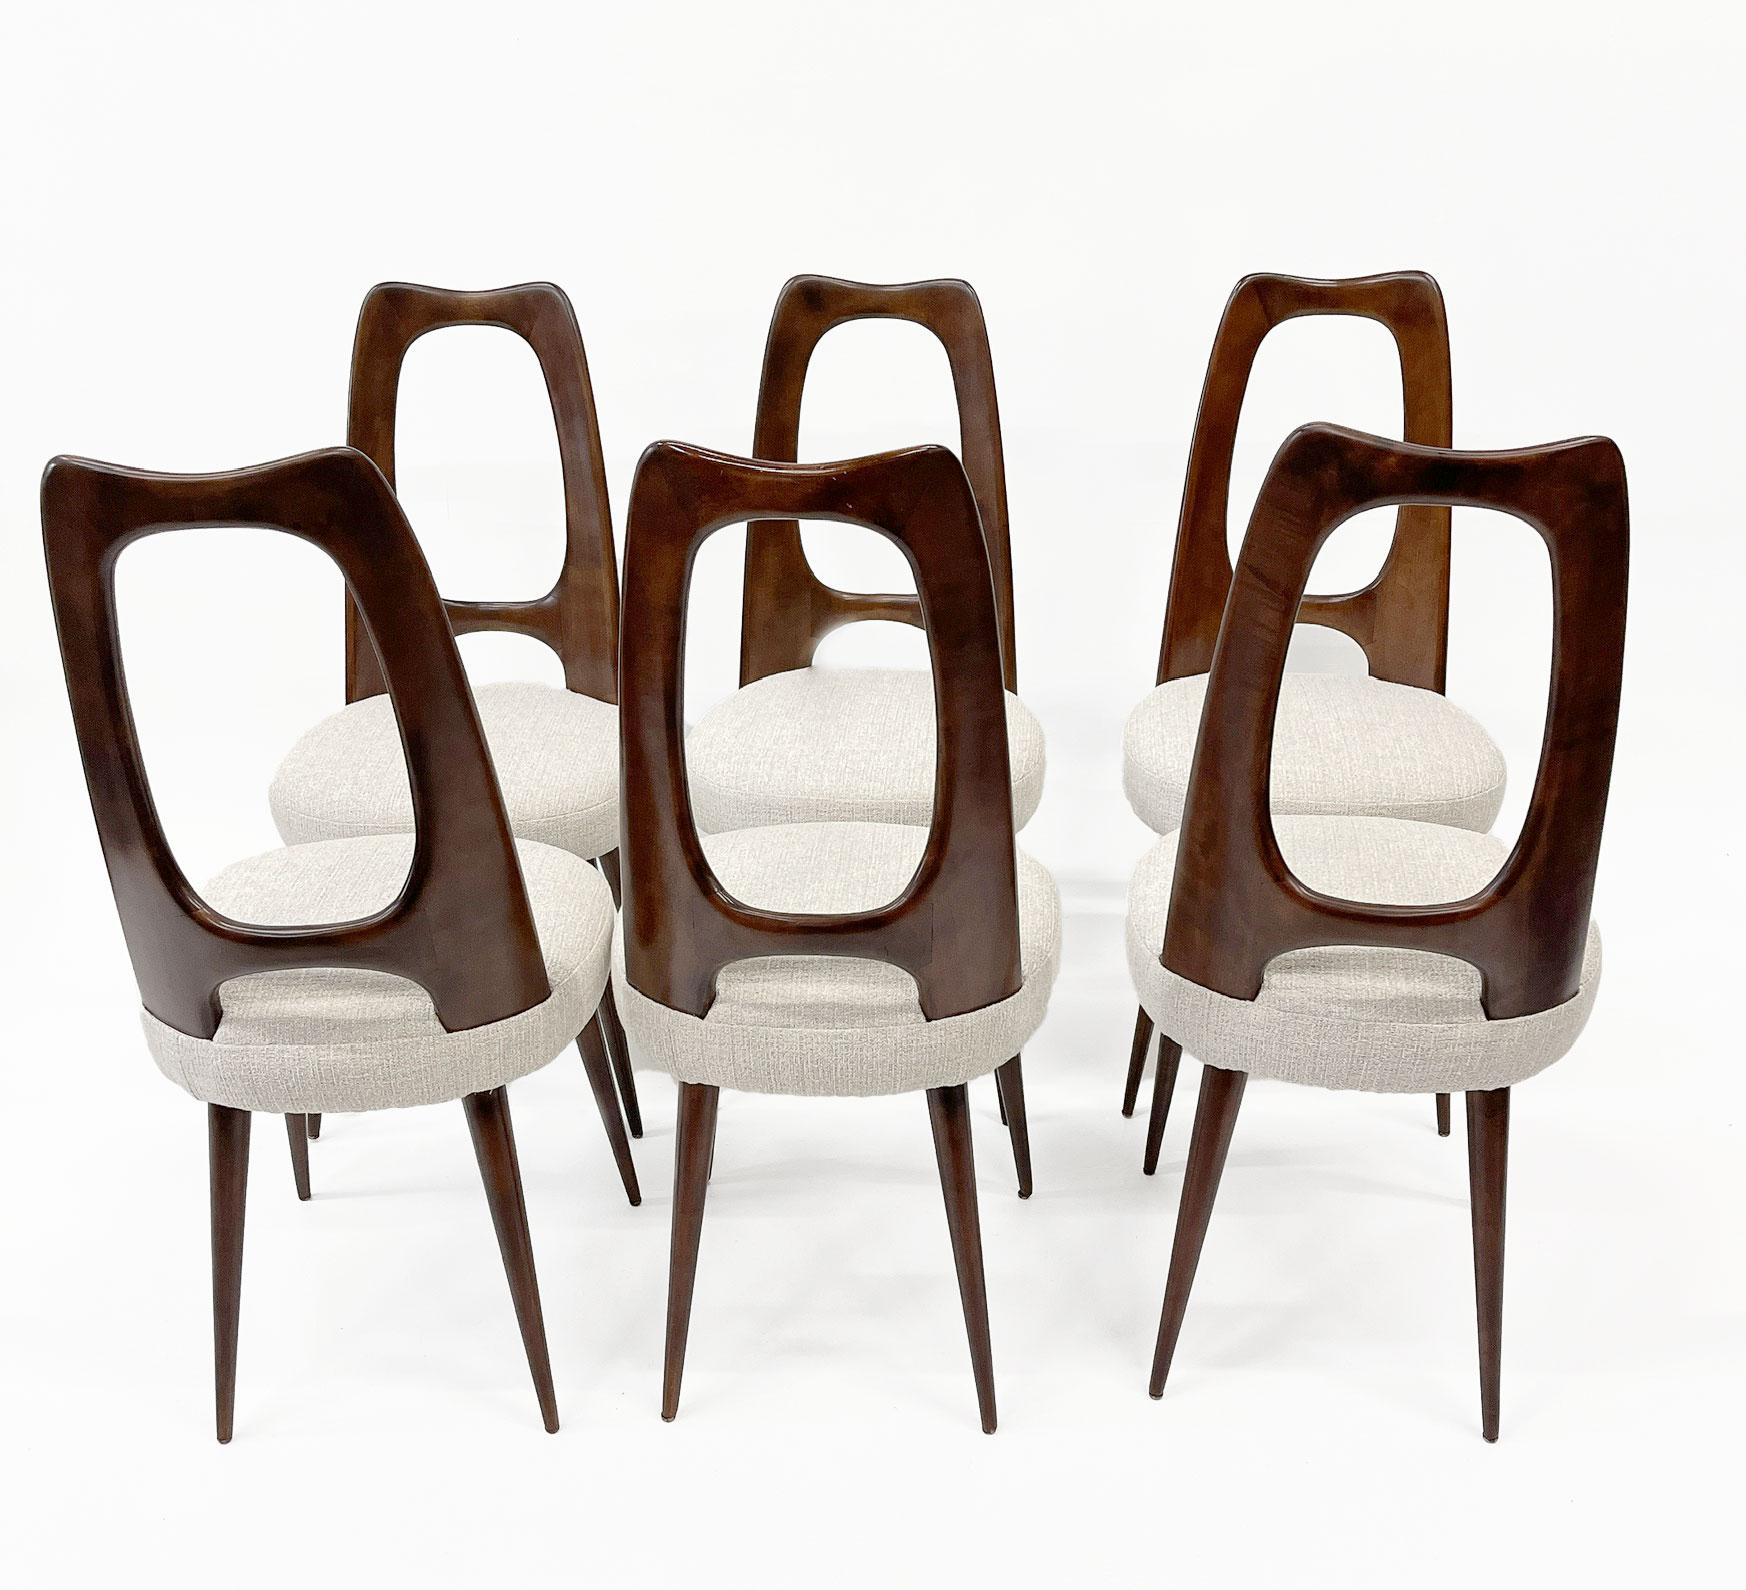 Six dining chairs designed by the famous Italian architect Vittorio Dassi, solid mahogany chairs and reupholstery in a Dedar fabric, in excellent condition.